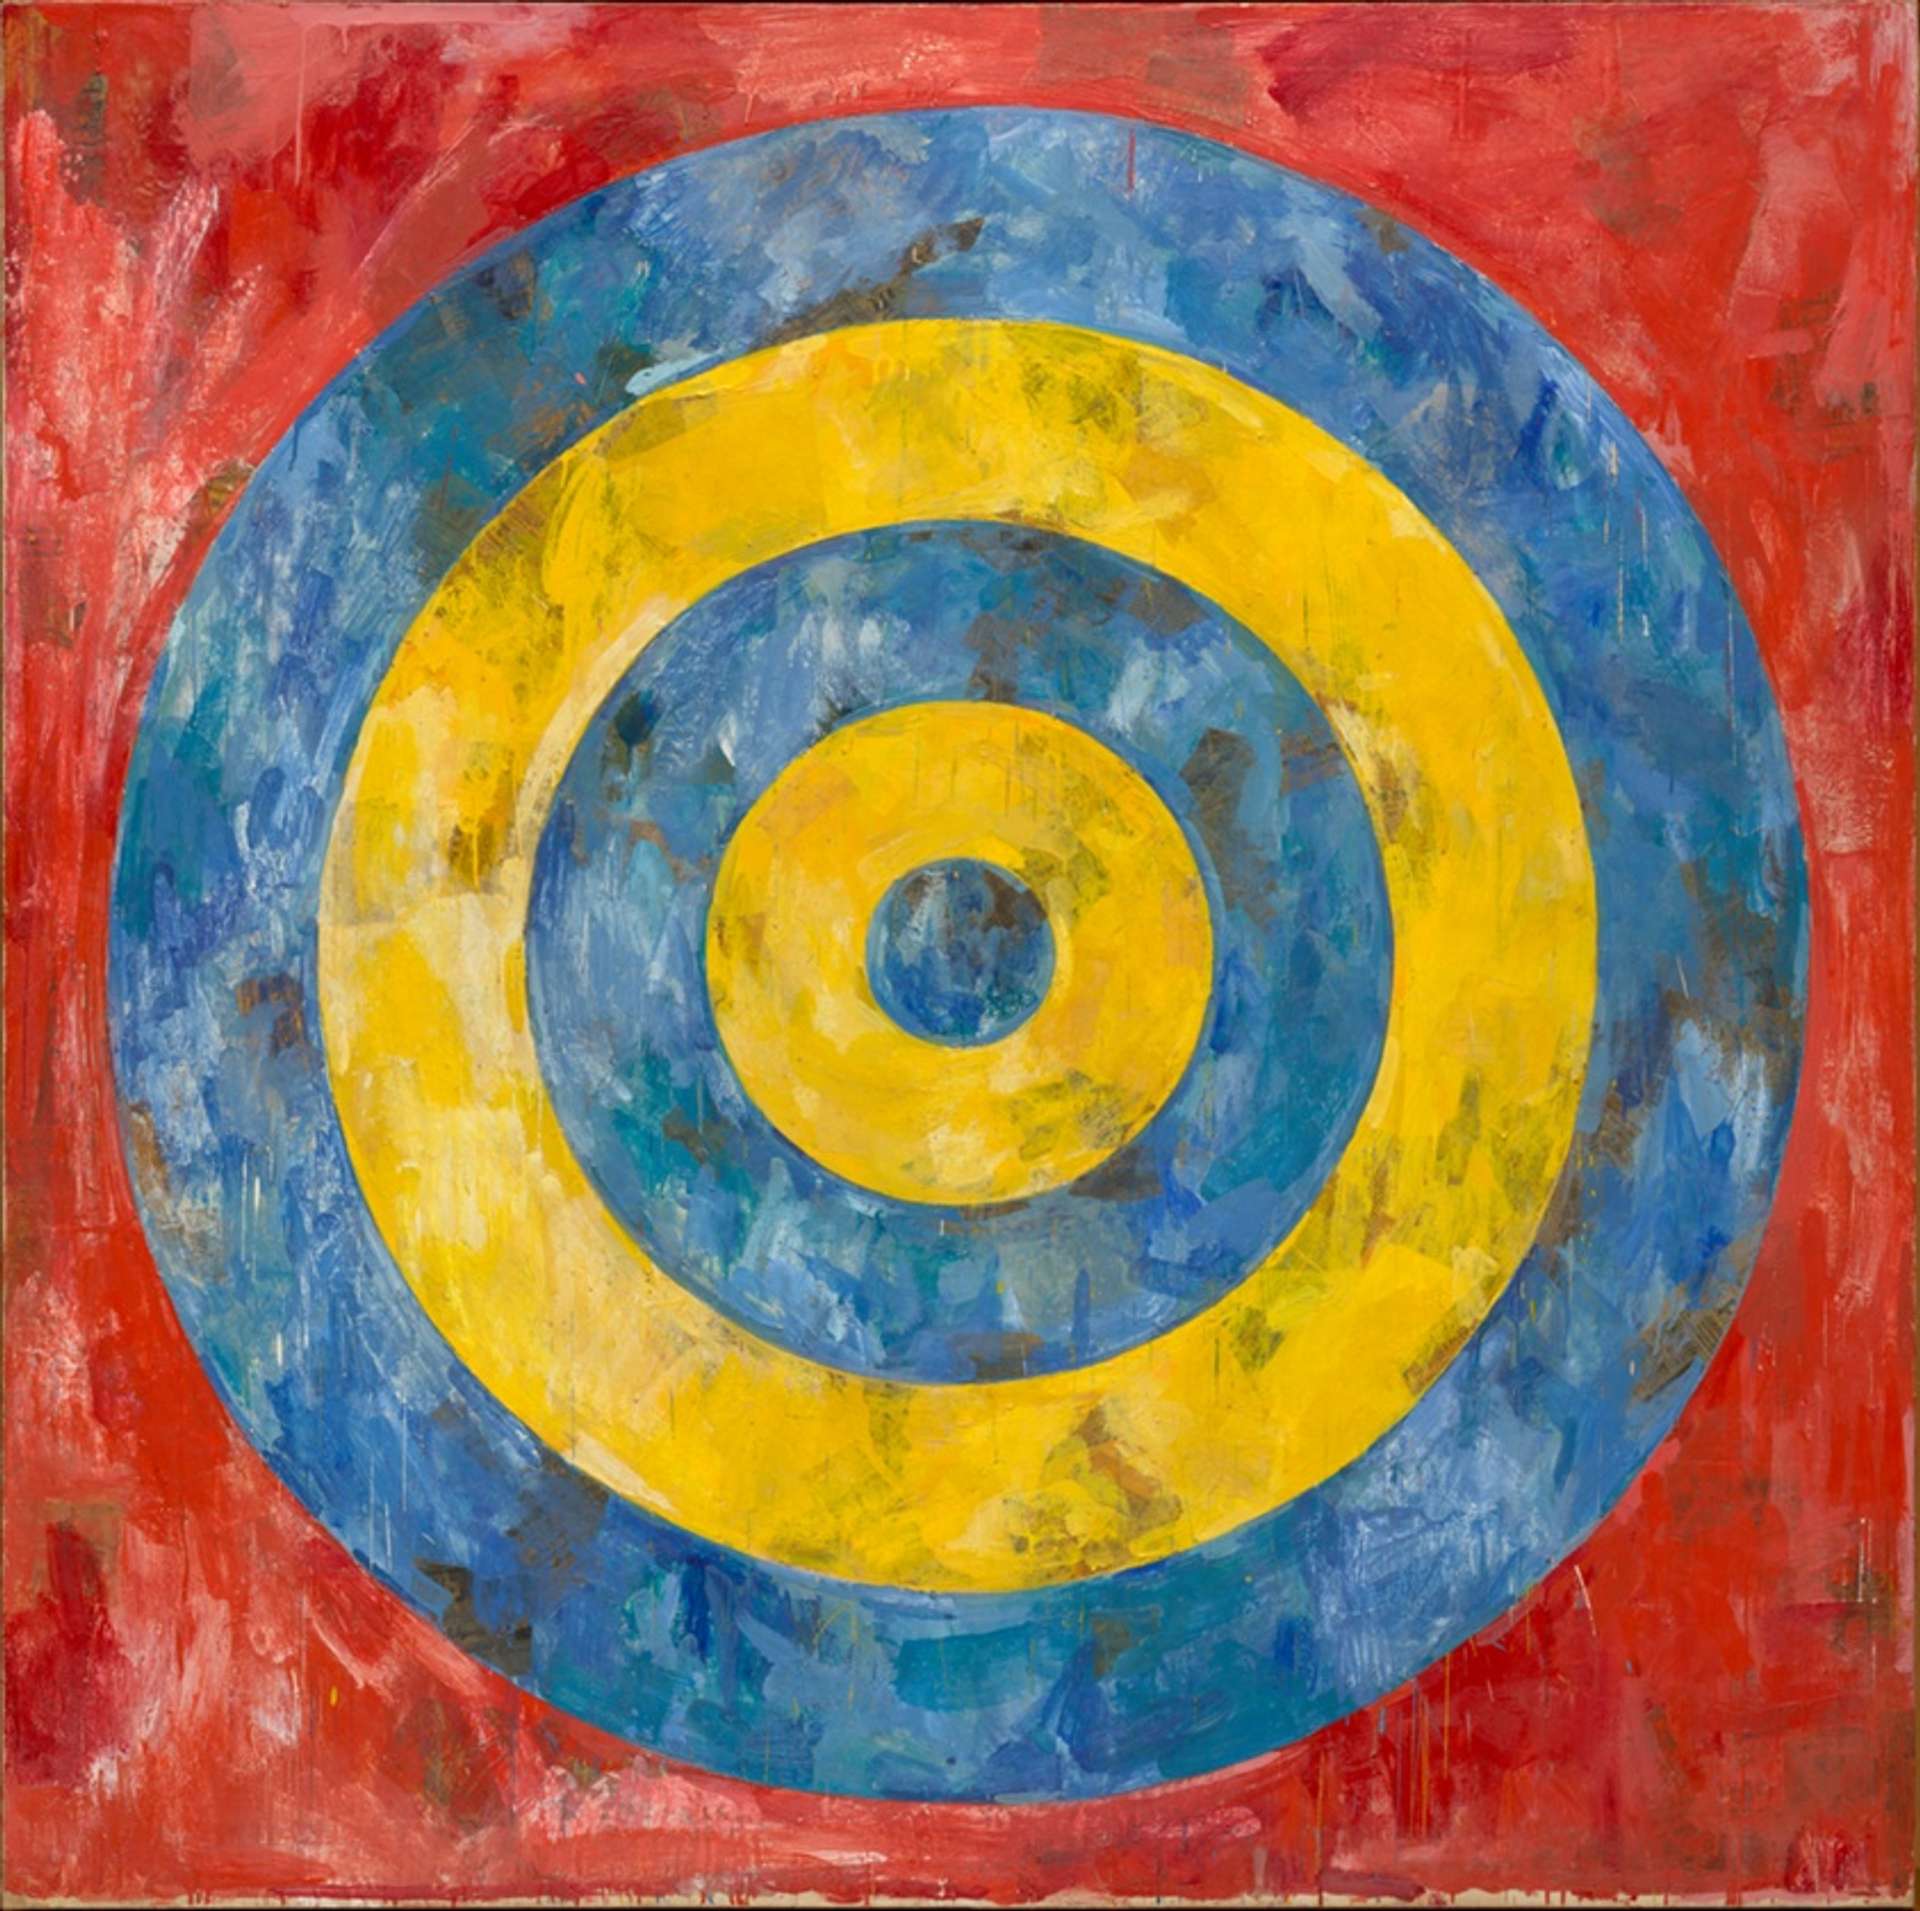 A yellow and blue target set against a red background